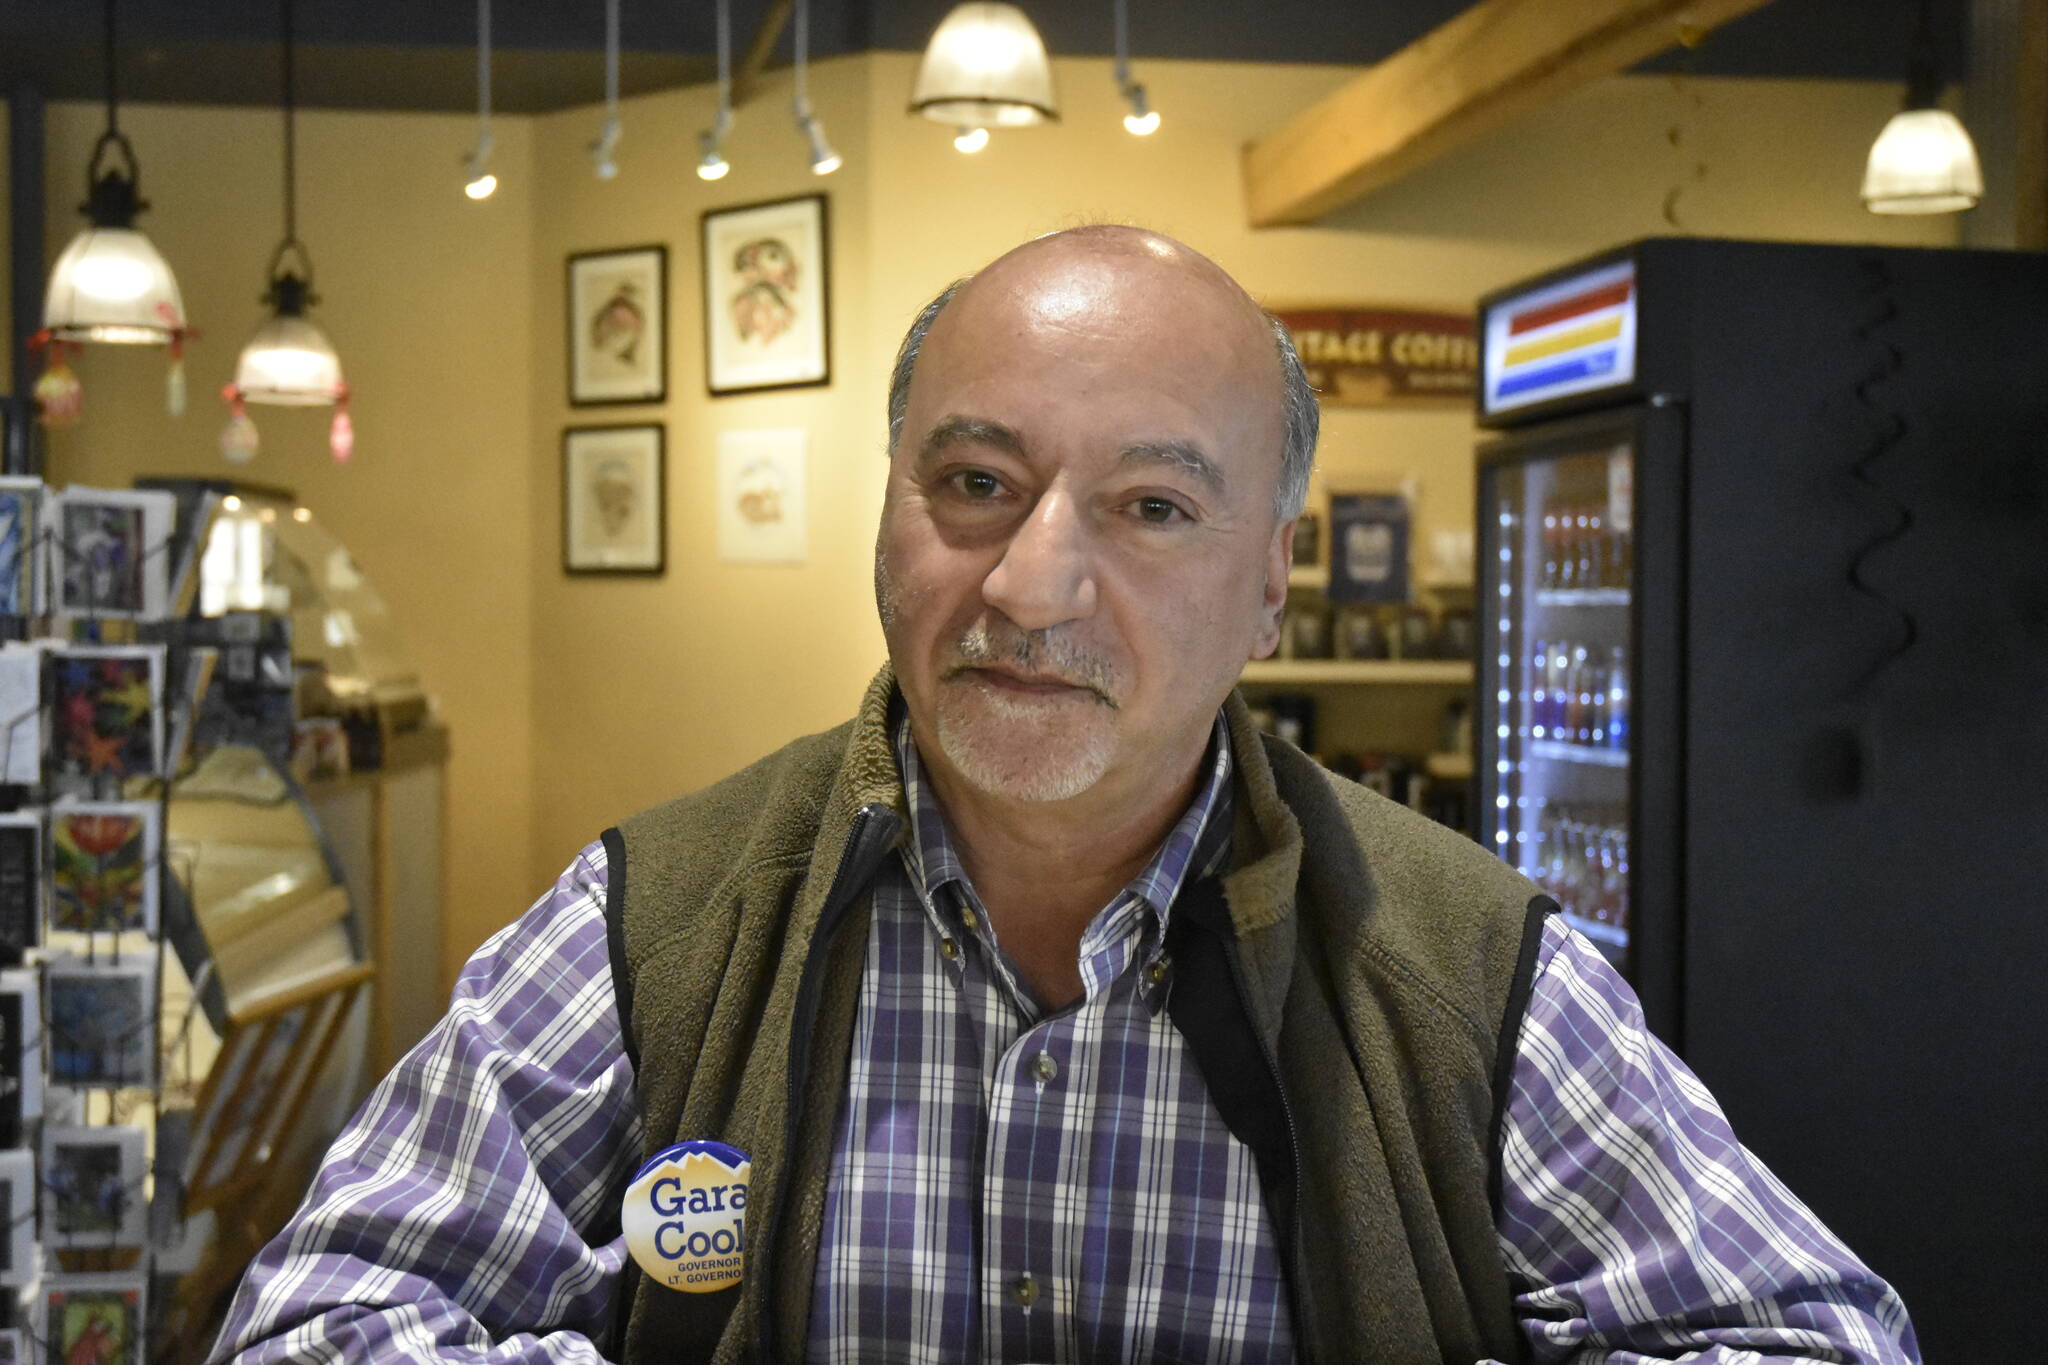 Former member of the Alaska House of Representatives Les Gara was in Juneau on Friday, April 8, 2022, and met with the Empire to talk about what sets him apart from the other candidates in the race for governor. (Peter Segall / Juneau Empire)